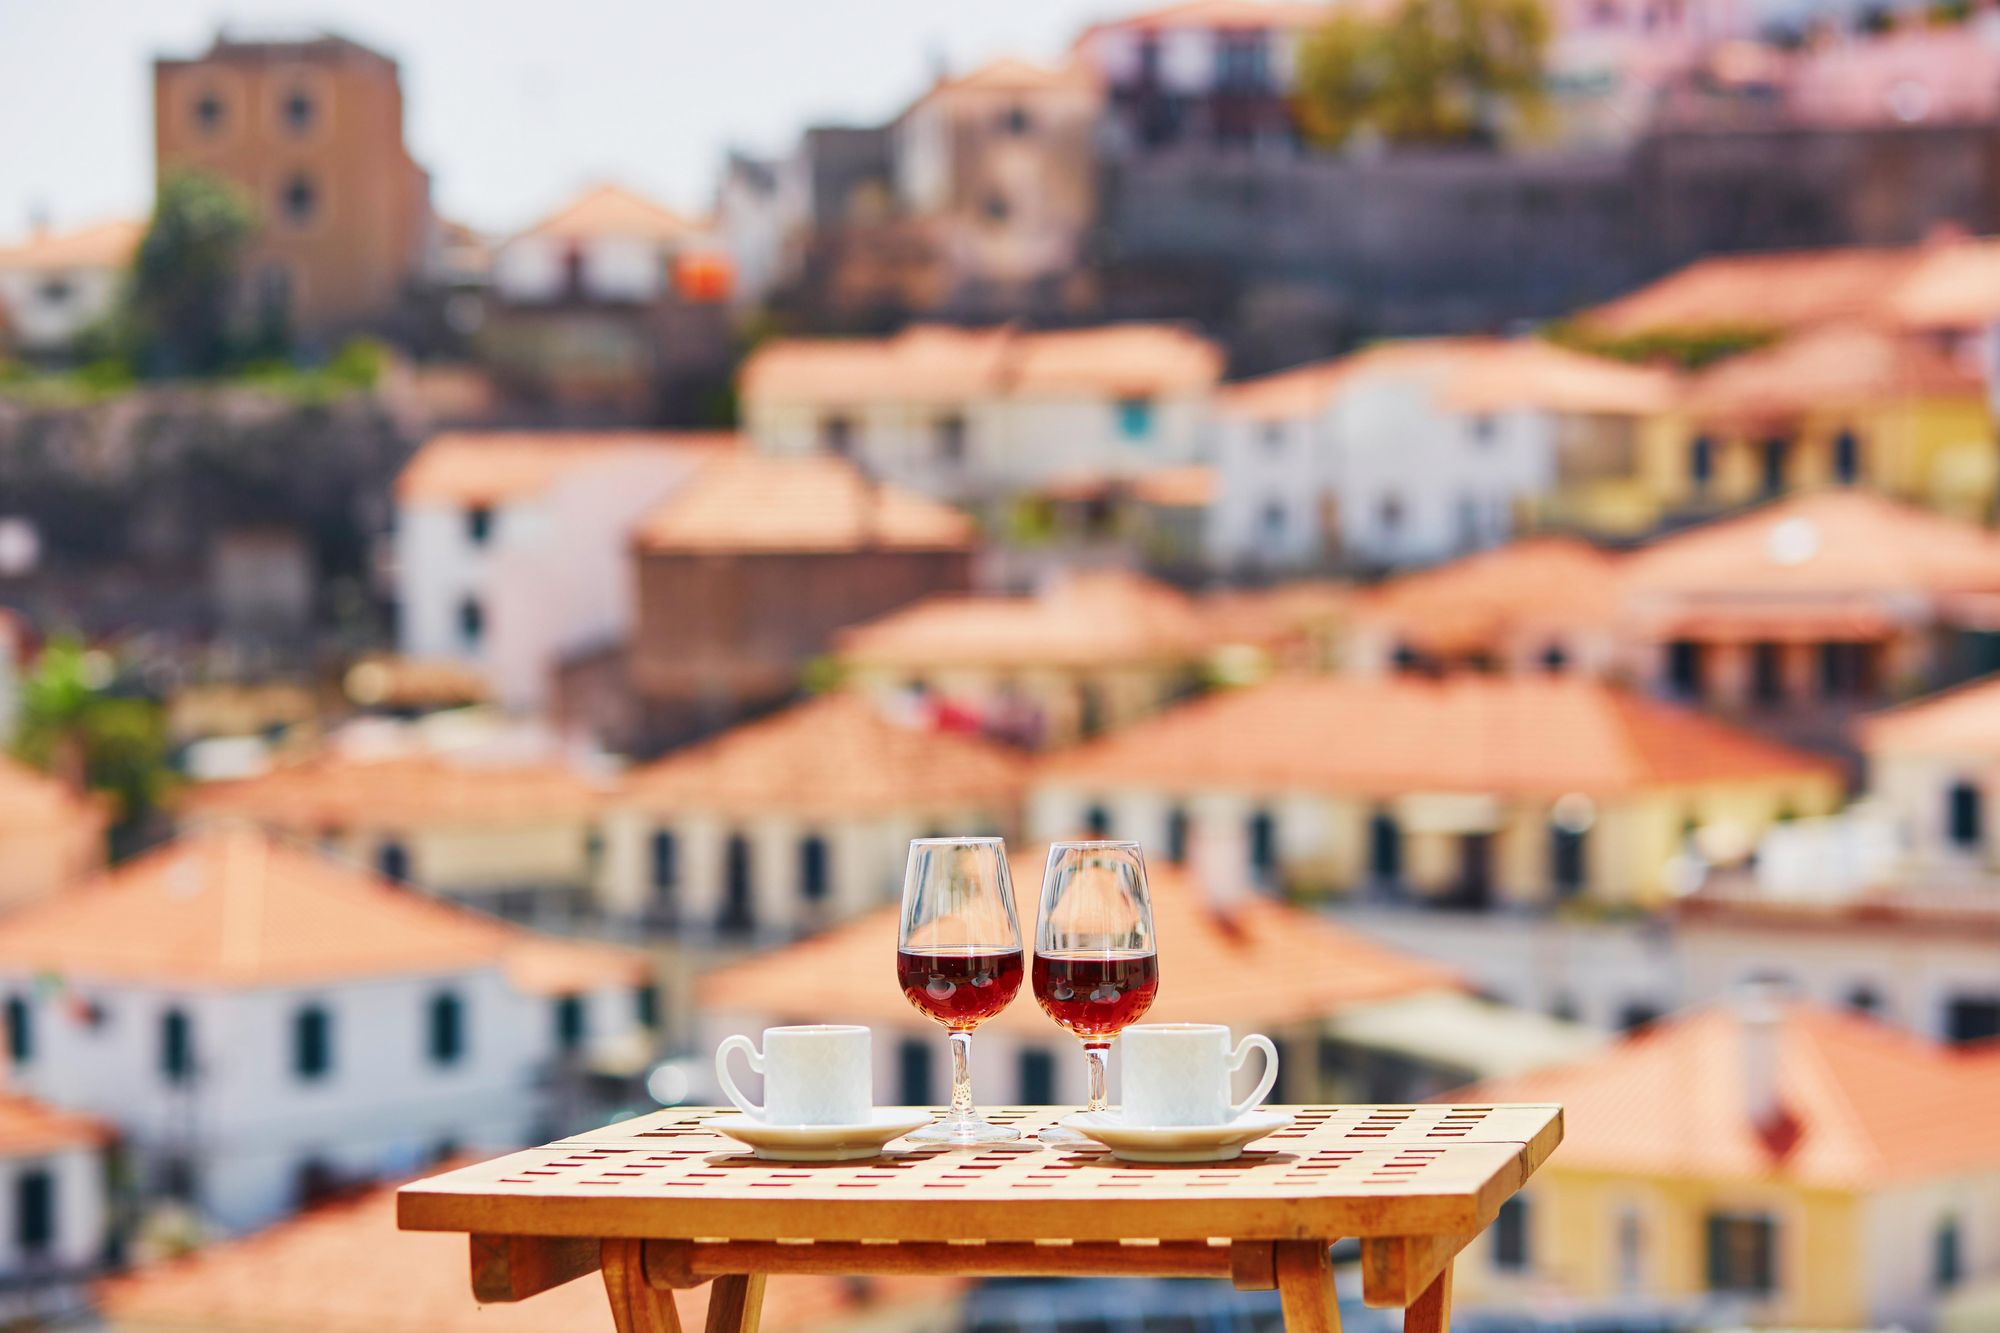 Madeira wine is one of the most famous exports of the island. Photo: Getty